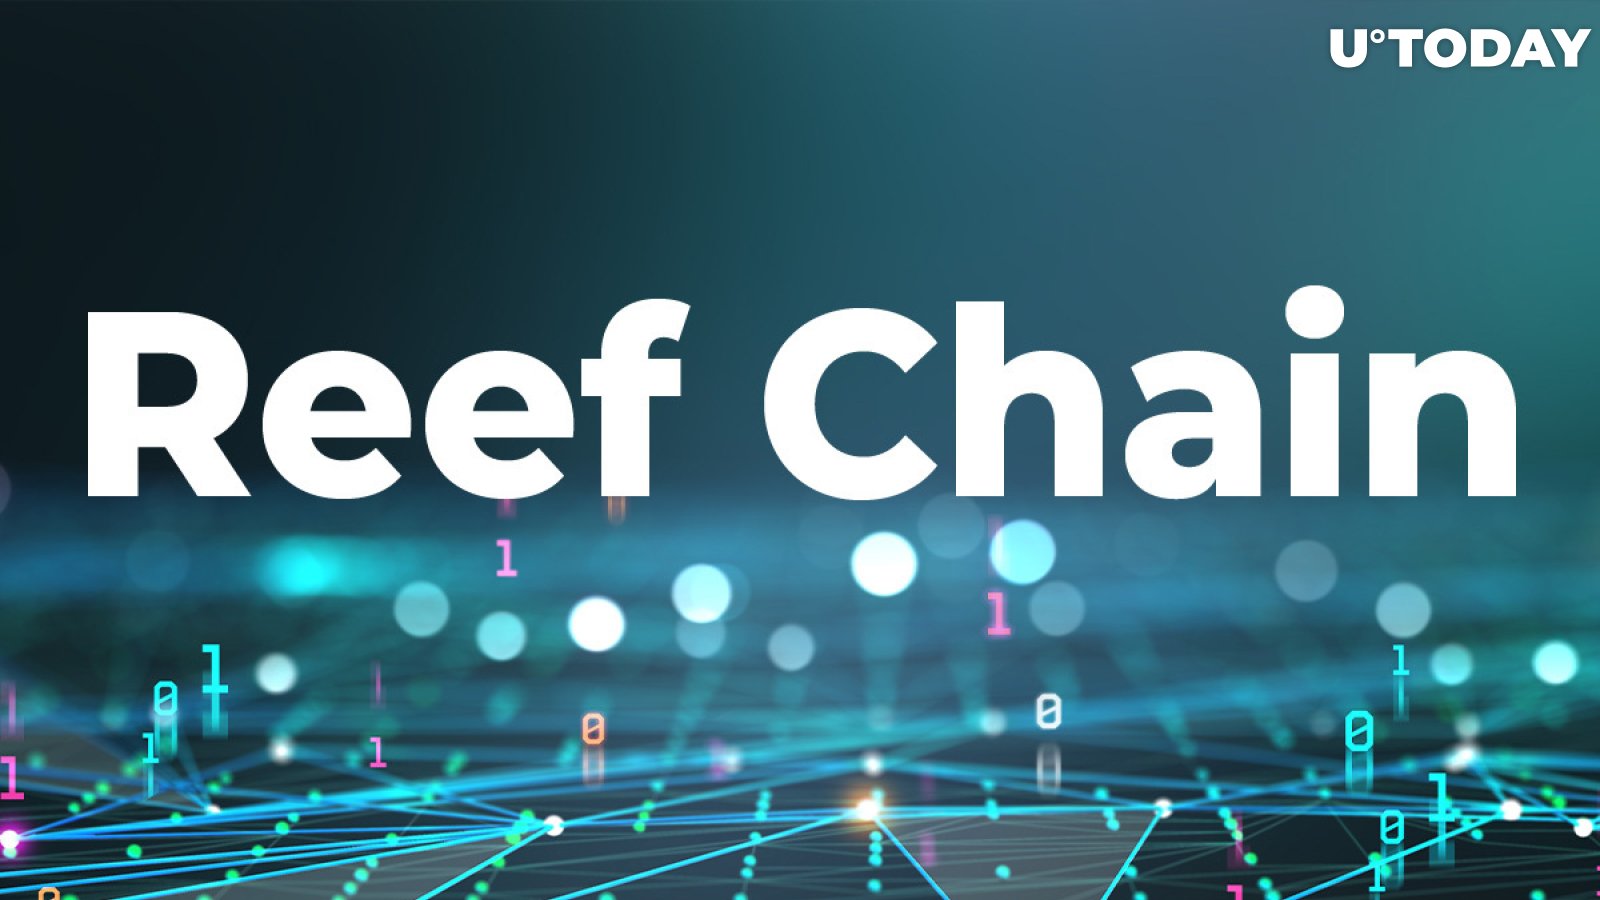 Reef Finance Finally Shares Mainnet Dates for Reef Chain, Teases Massive Opportunities for DeFi